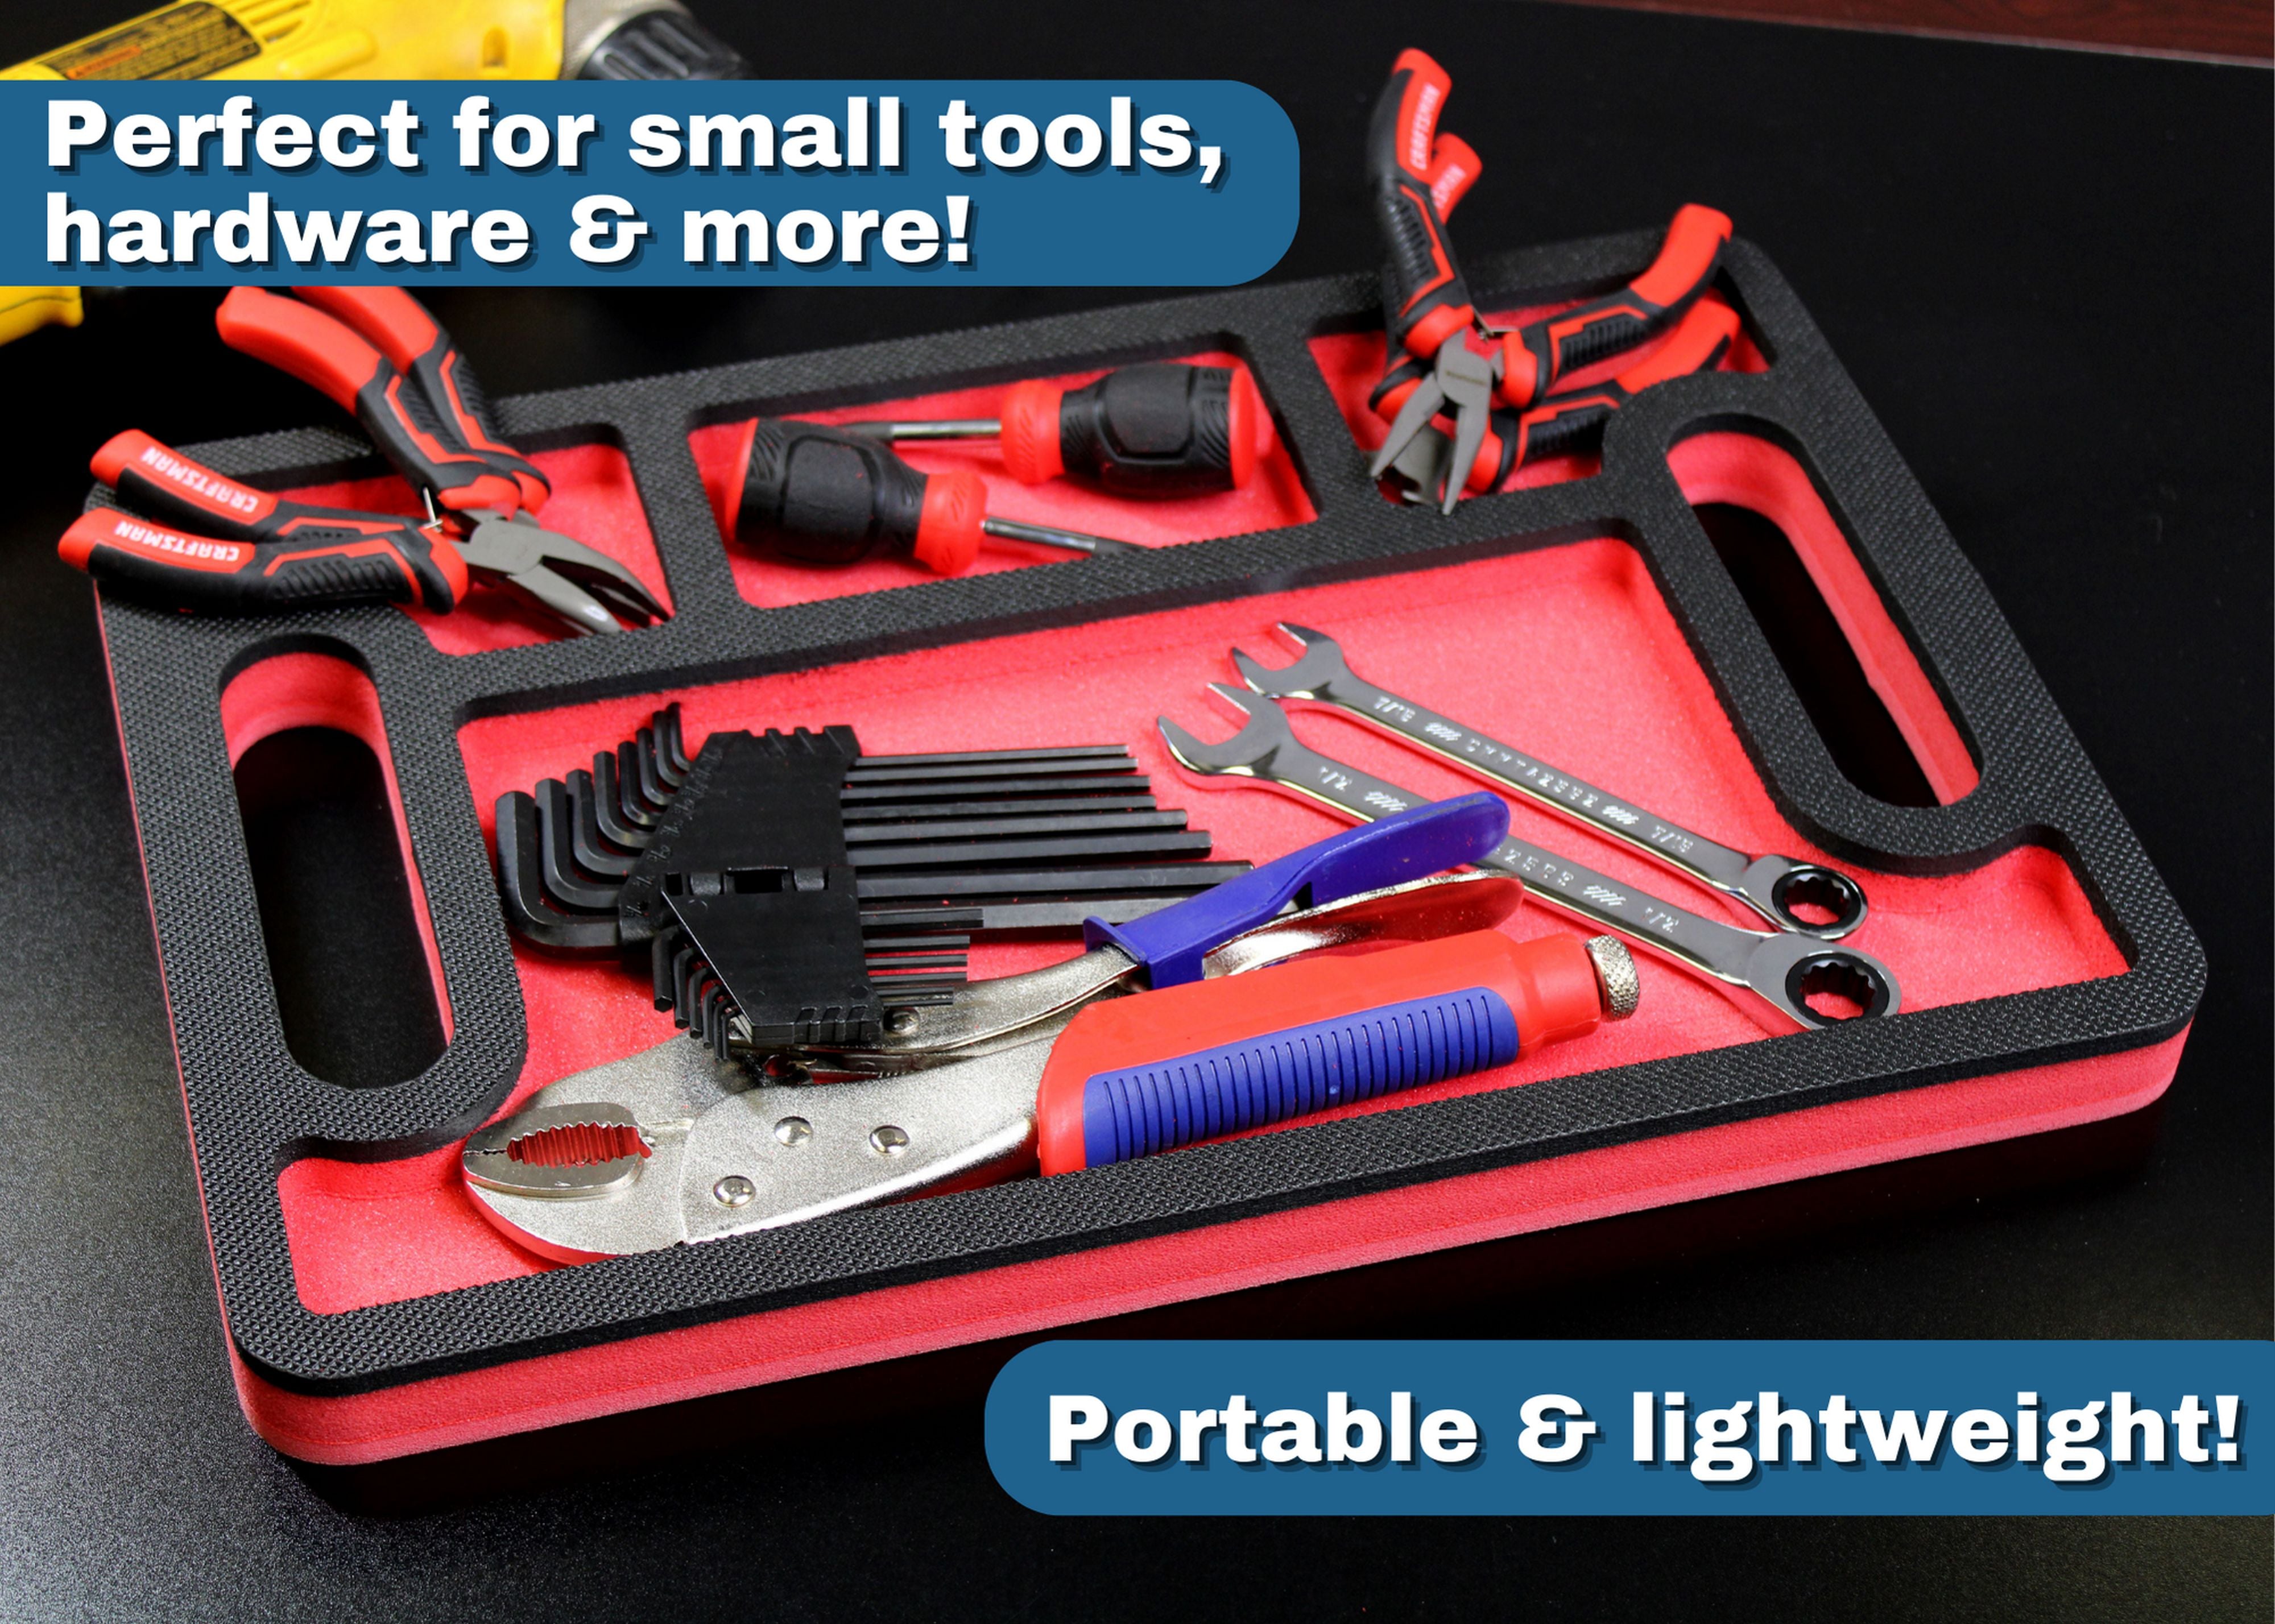 Tool Work Tray Organizer Red and Black Durable Foam Strong Non-Slip Anti-Rattle Bin Holder Drawer Insert with Handles 4 Pockets Portable Automotive Home Work Shop Garage 15 x 10 Inches